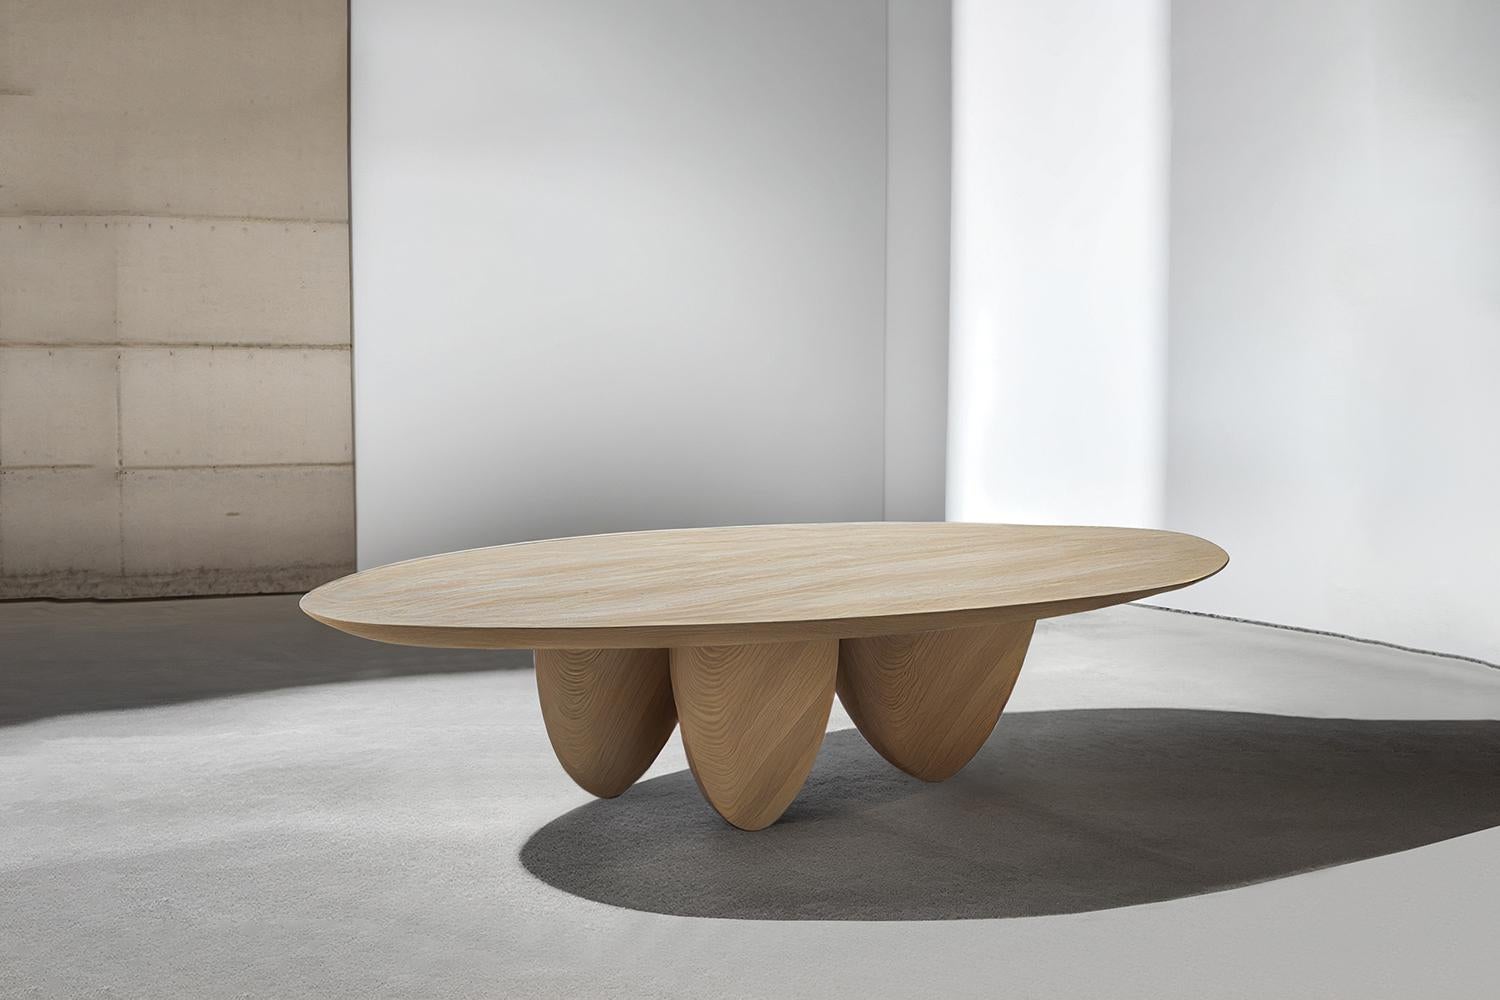 natural wood coffee table